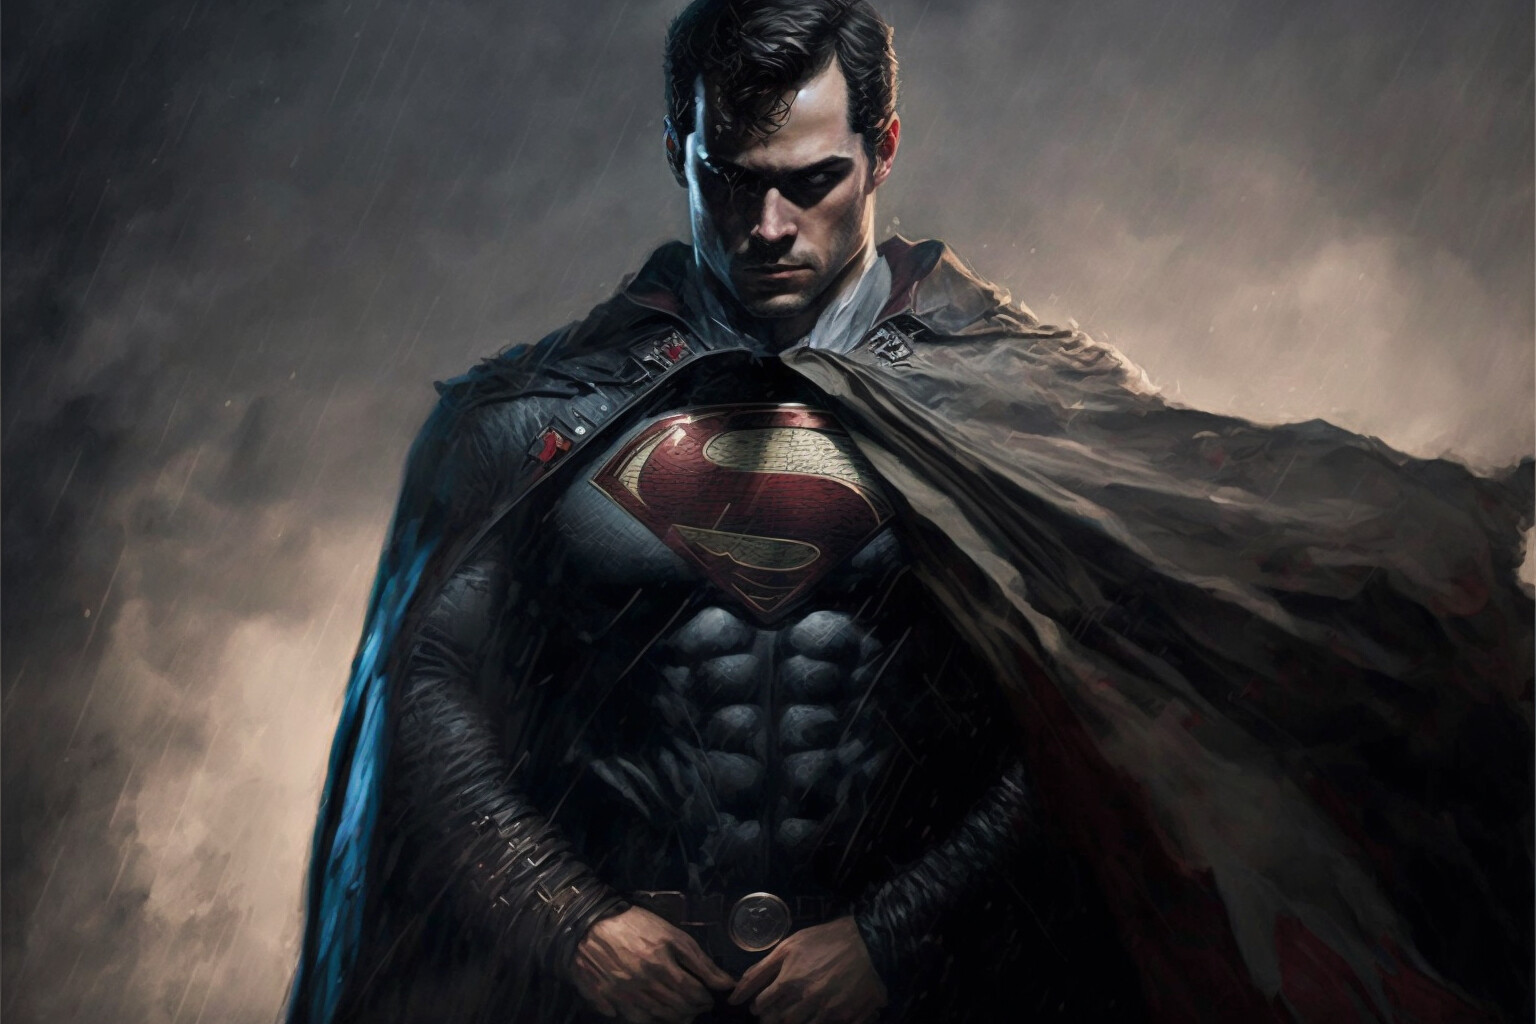 Henry Cavill as Superman Wallpapers, HD Wallpapers